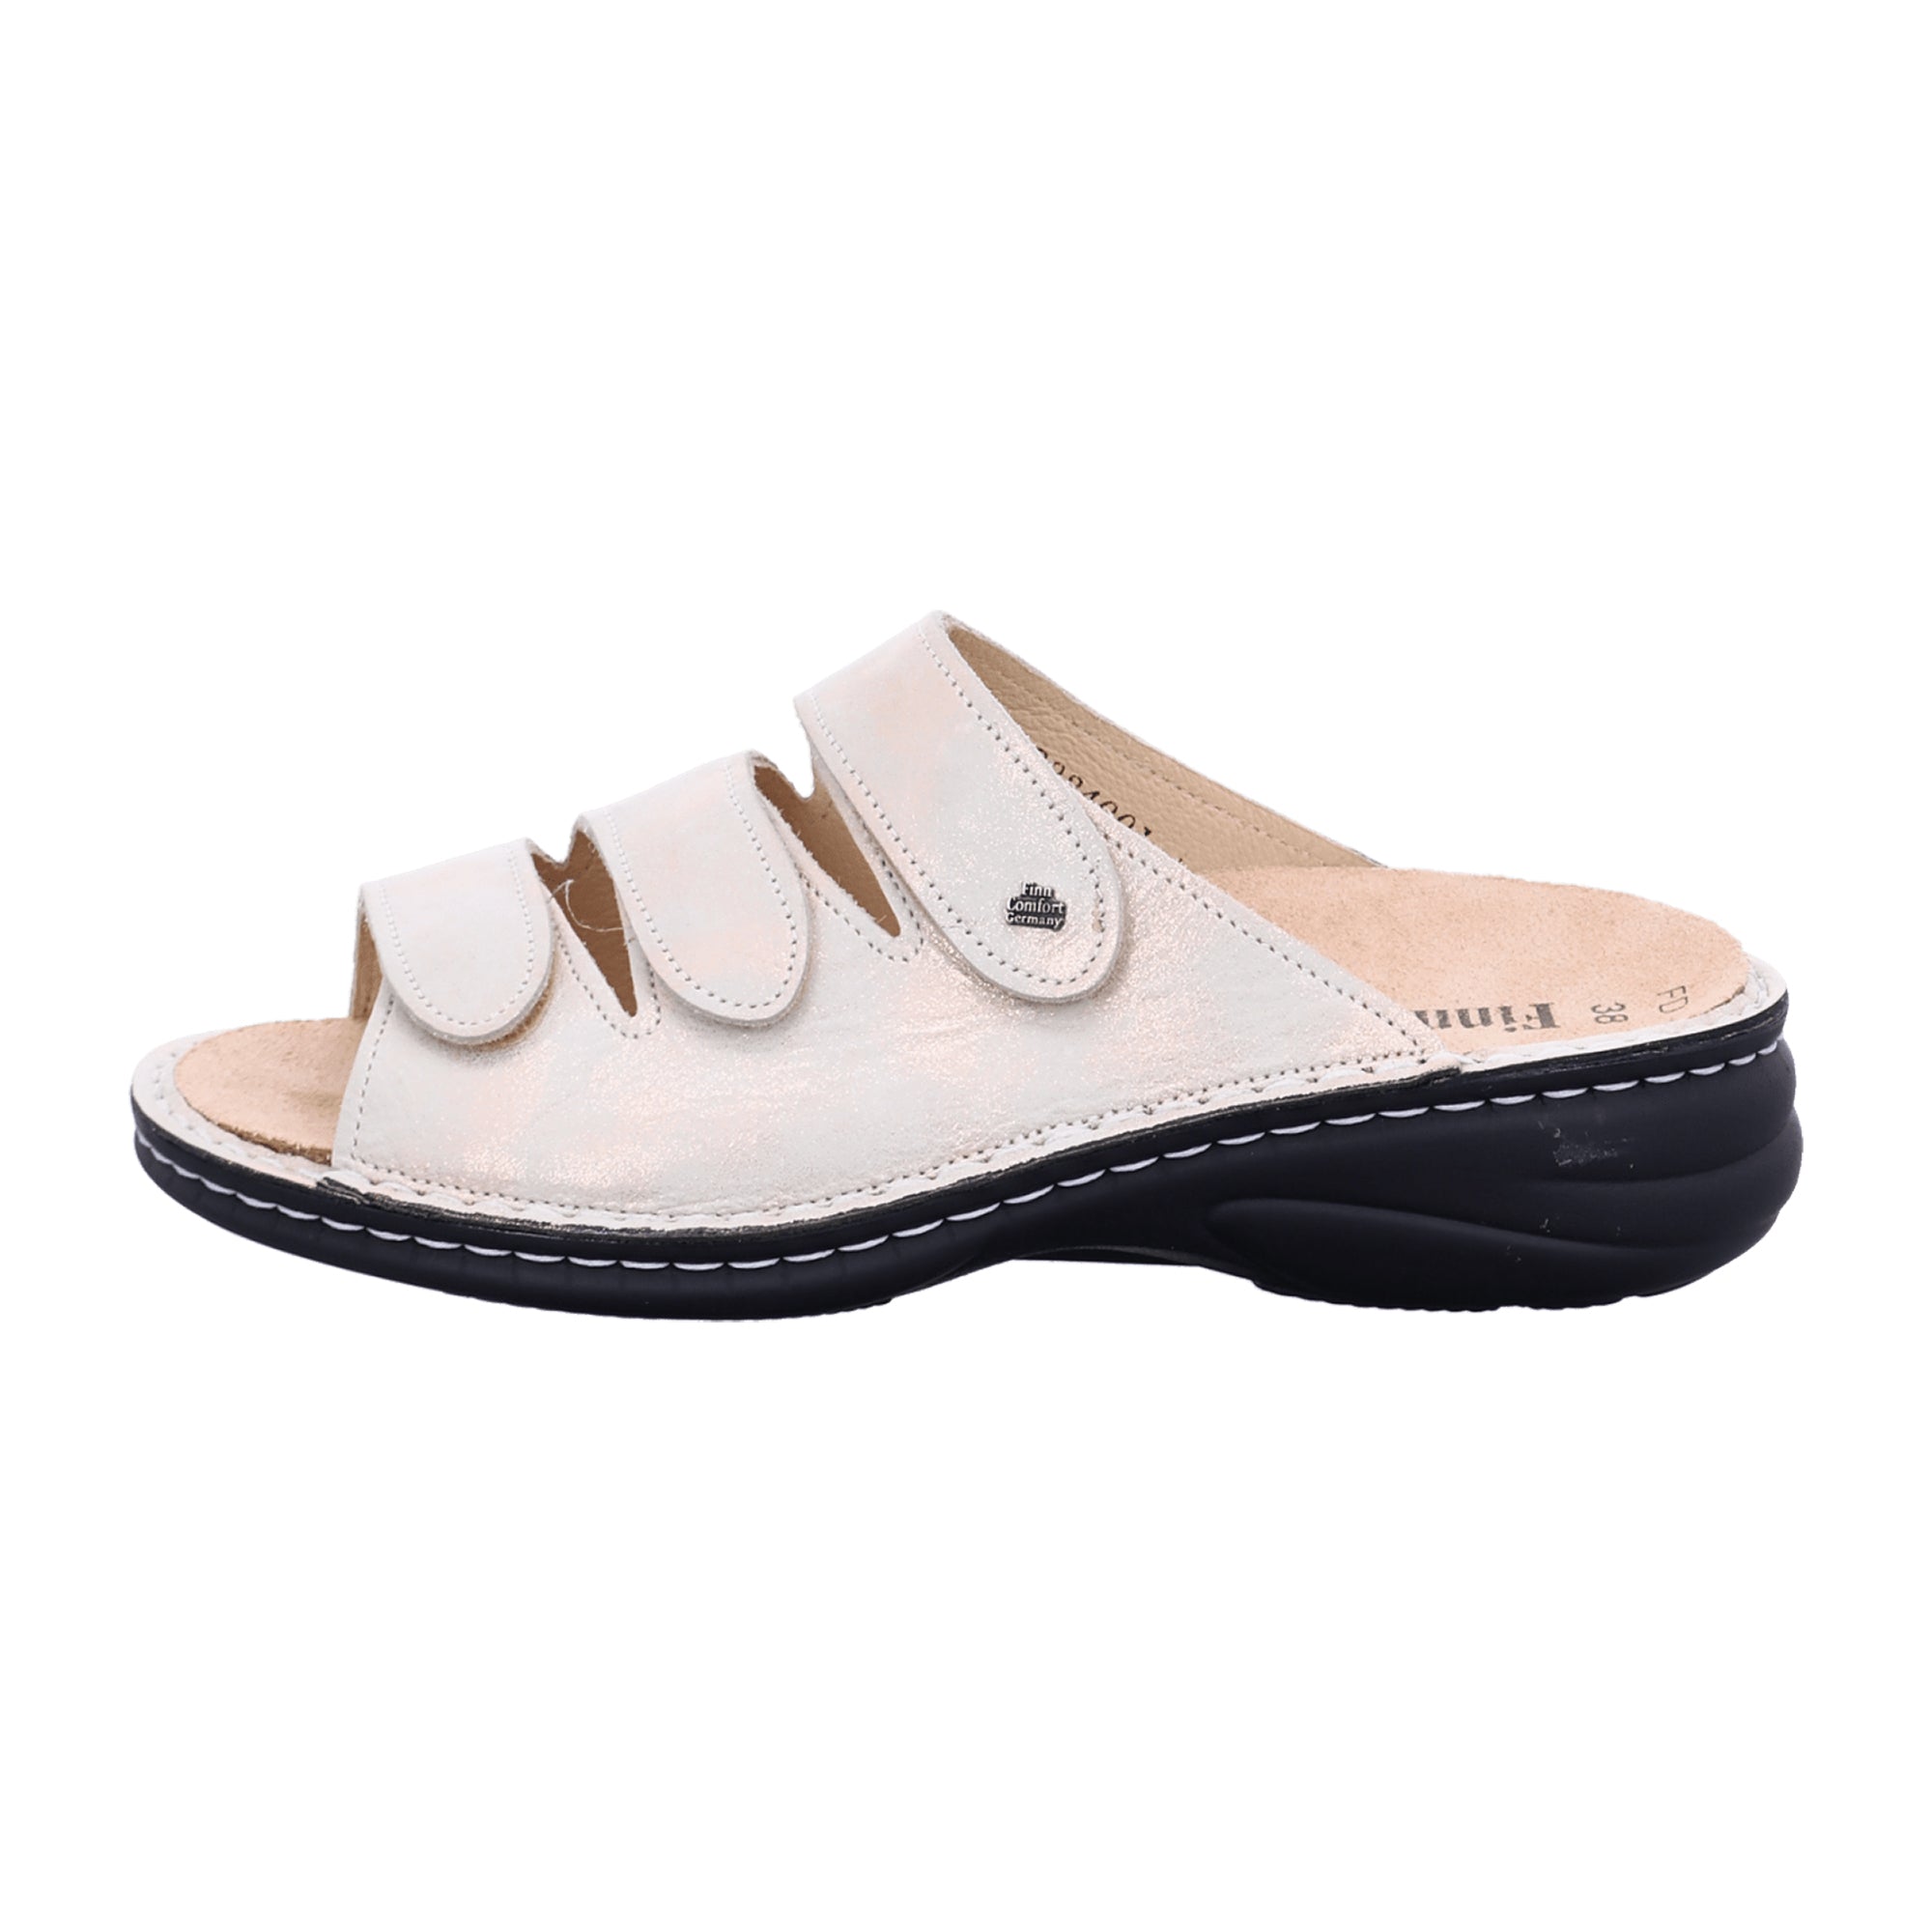 Finn Comfort Hellas Women's Slides - Beige Champagne Nuvola, Comfortable Leather Sandals with Removable Insoles